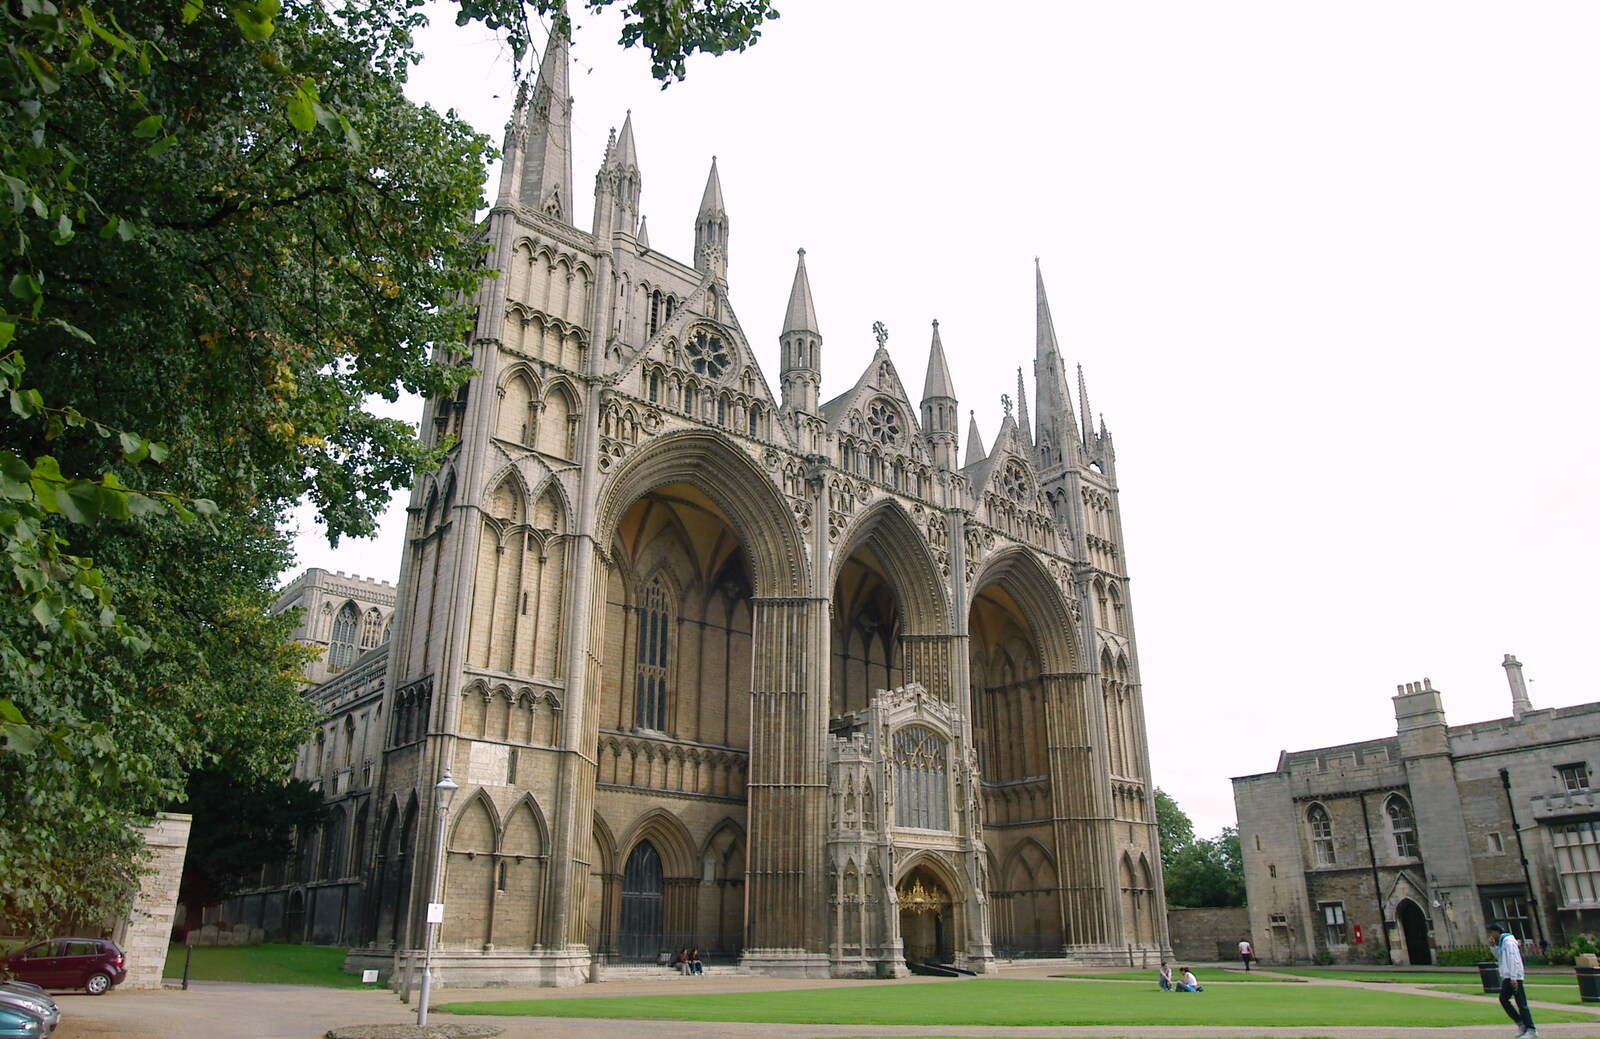 The grand entrance from Peterborough Cathedral, Cambridgeshire - 7th September 2005